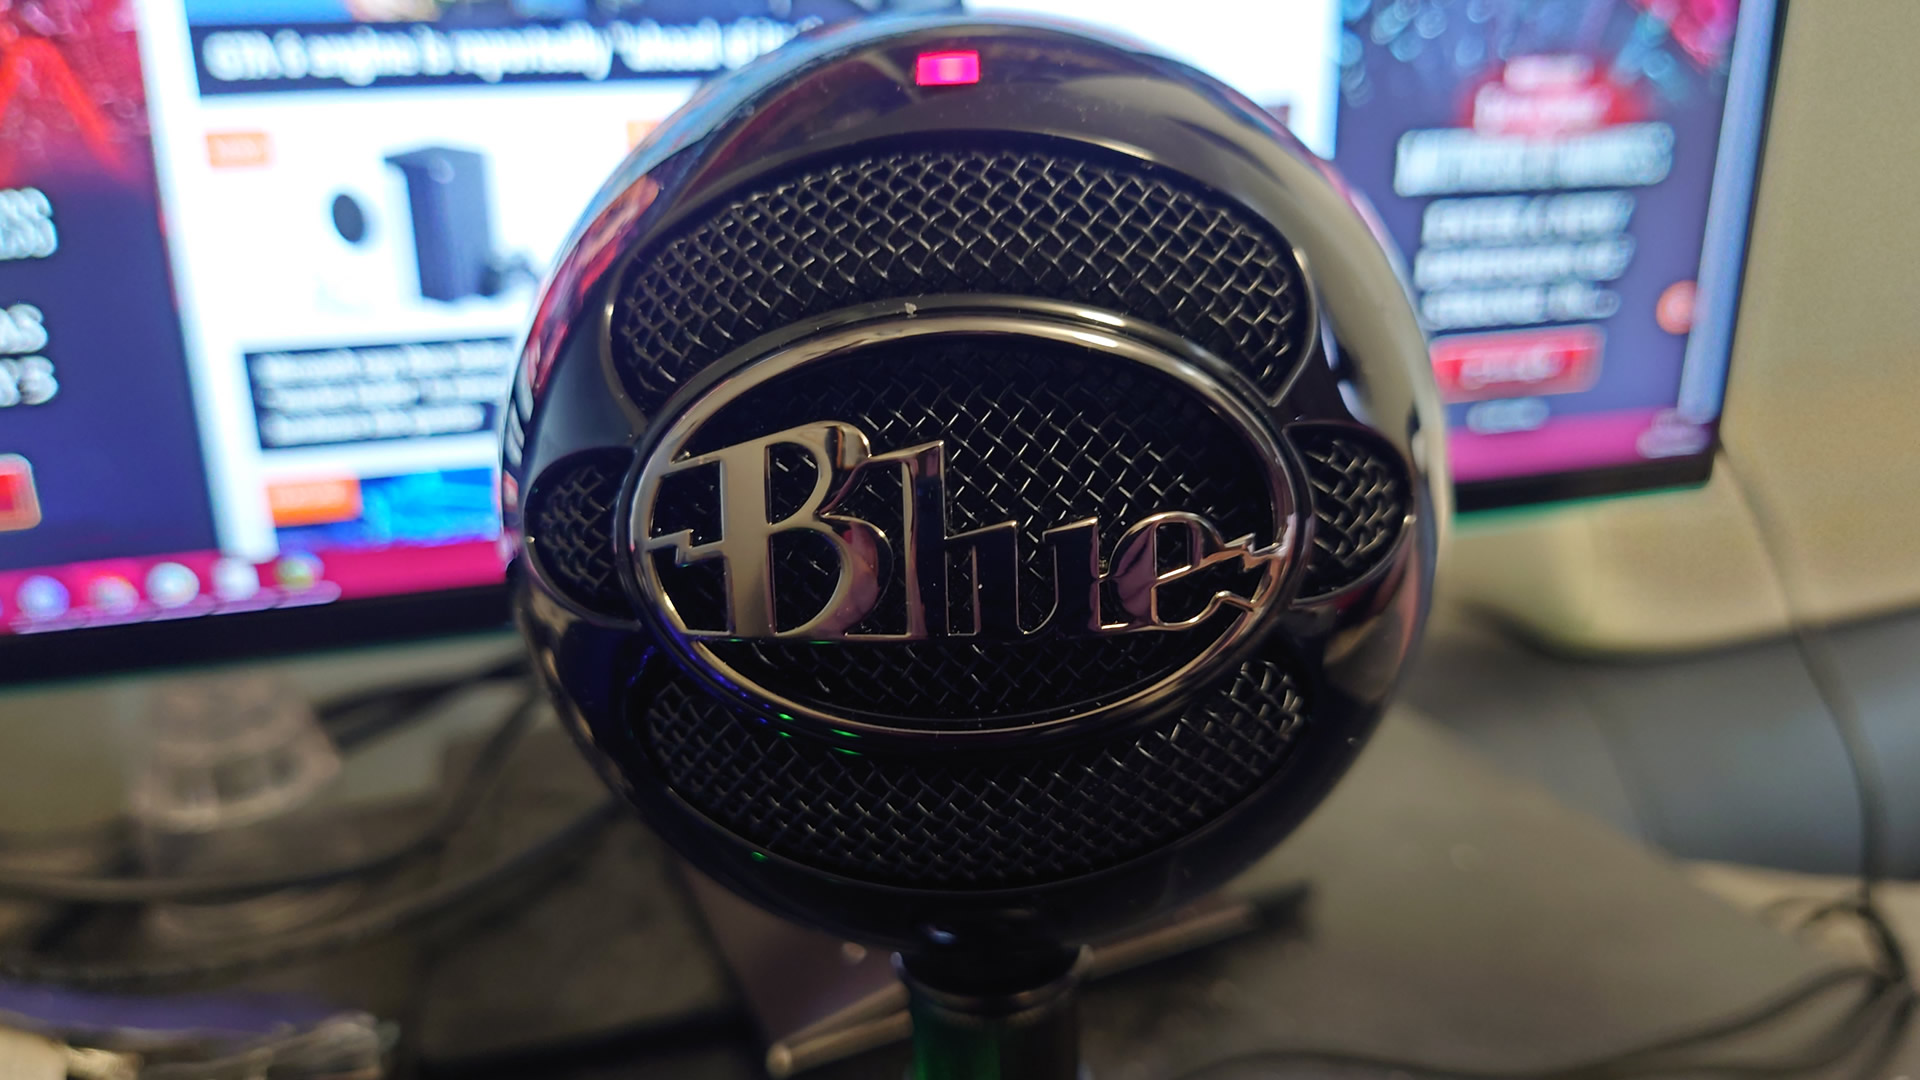 Blue Snowball review: "A classic for a reason" |